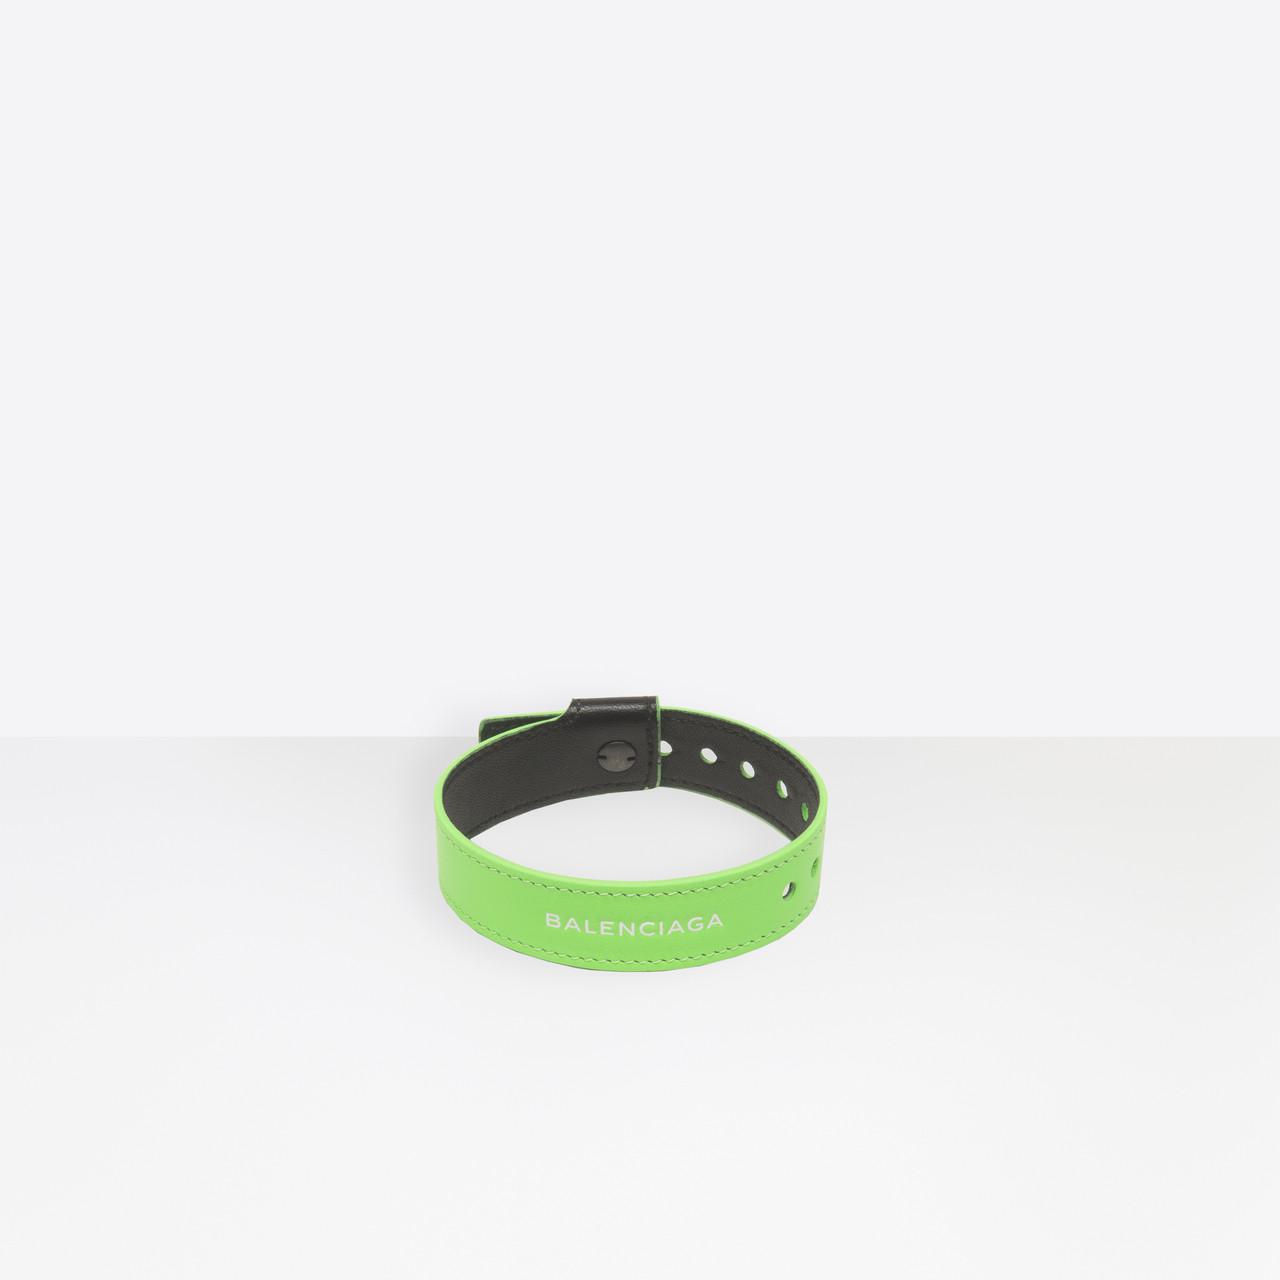 Balenciaga Leather Party Bracelet in Green for Men - Lyst